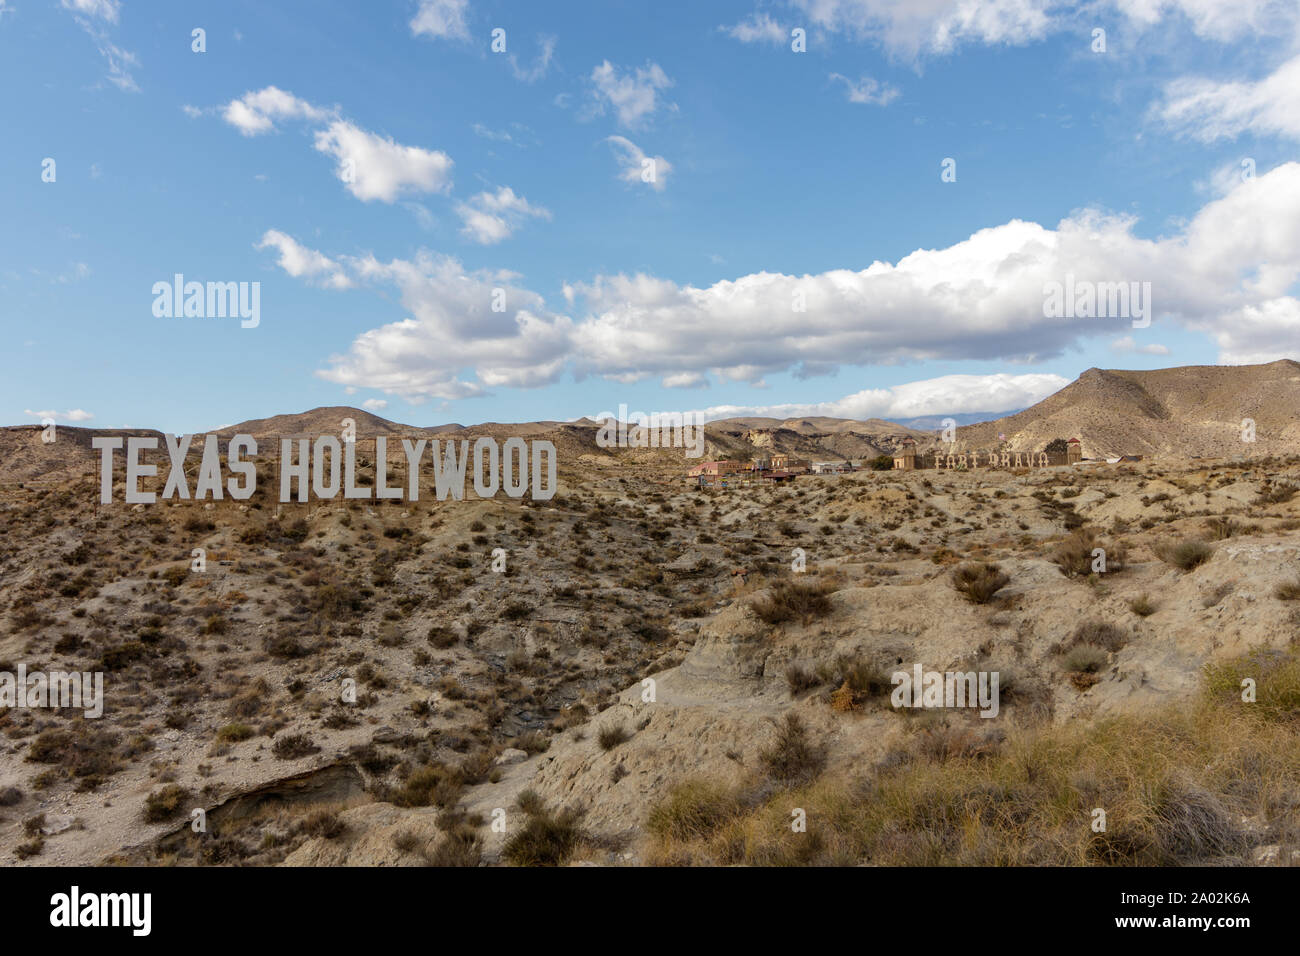 Almeria / Spain - January 26 2018: Texas Hollywood sign in Almeria Spain seen from a far with Fort Bravo behind it Stock Photo